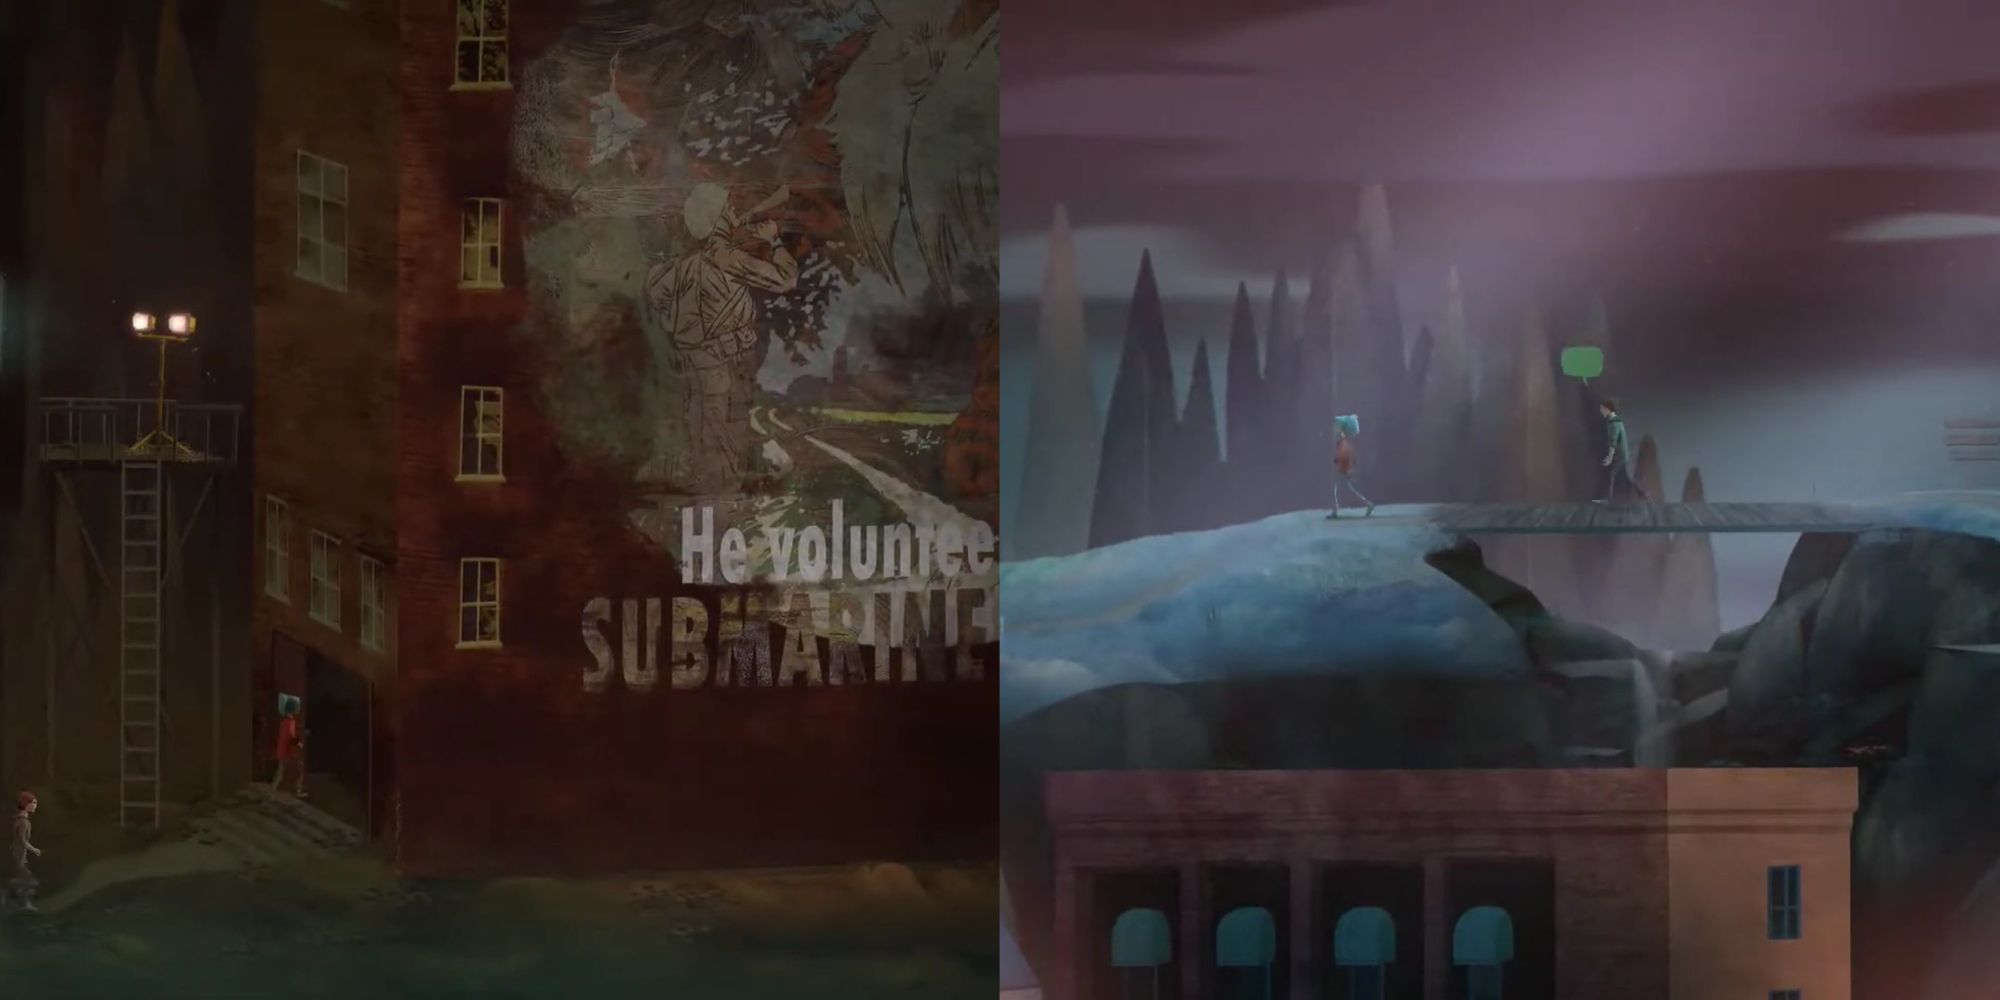 Split image of environmental storytelling with the submarine propaganda on a building and Alex going across a bridge.